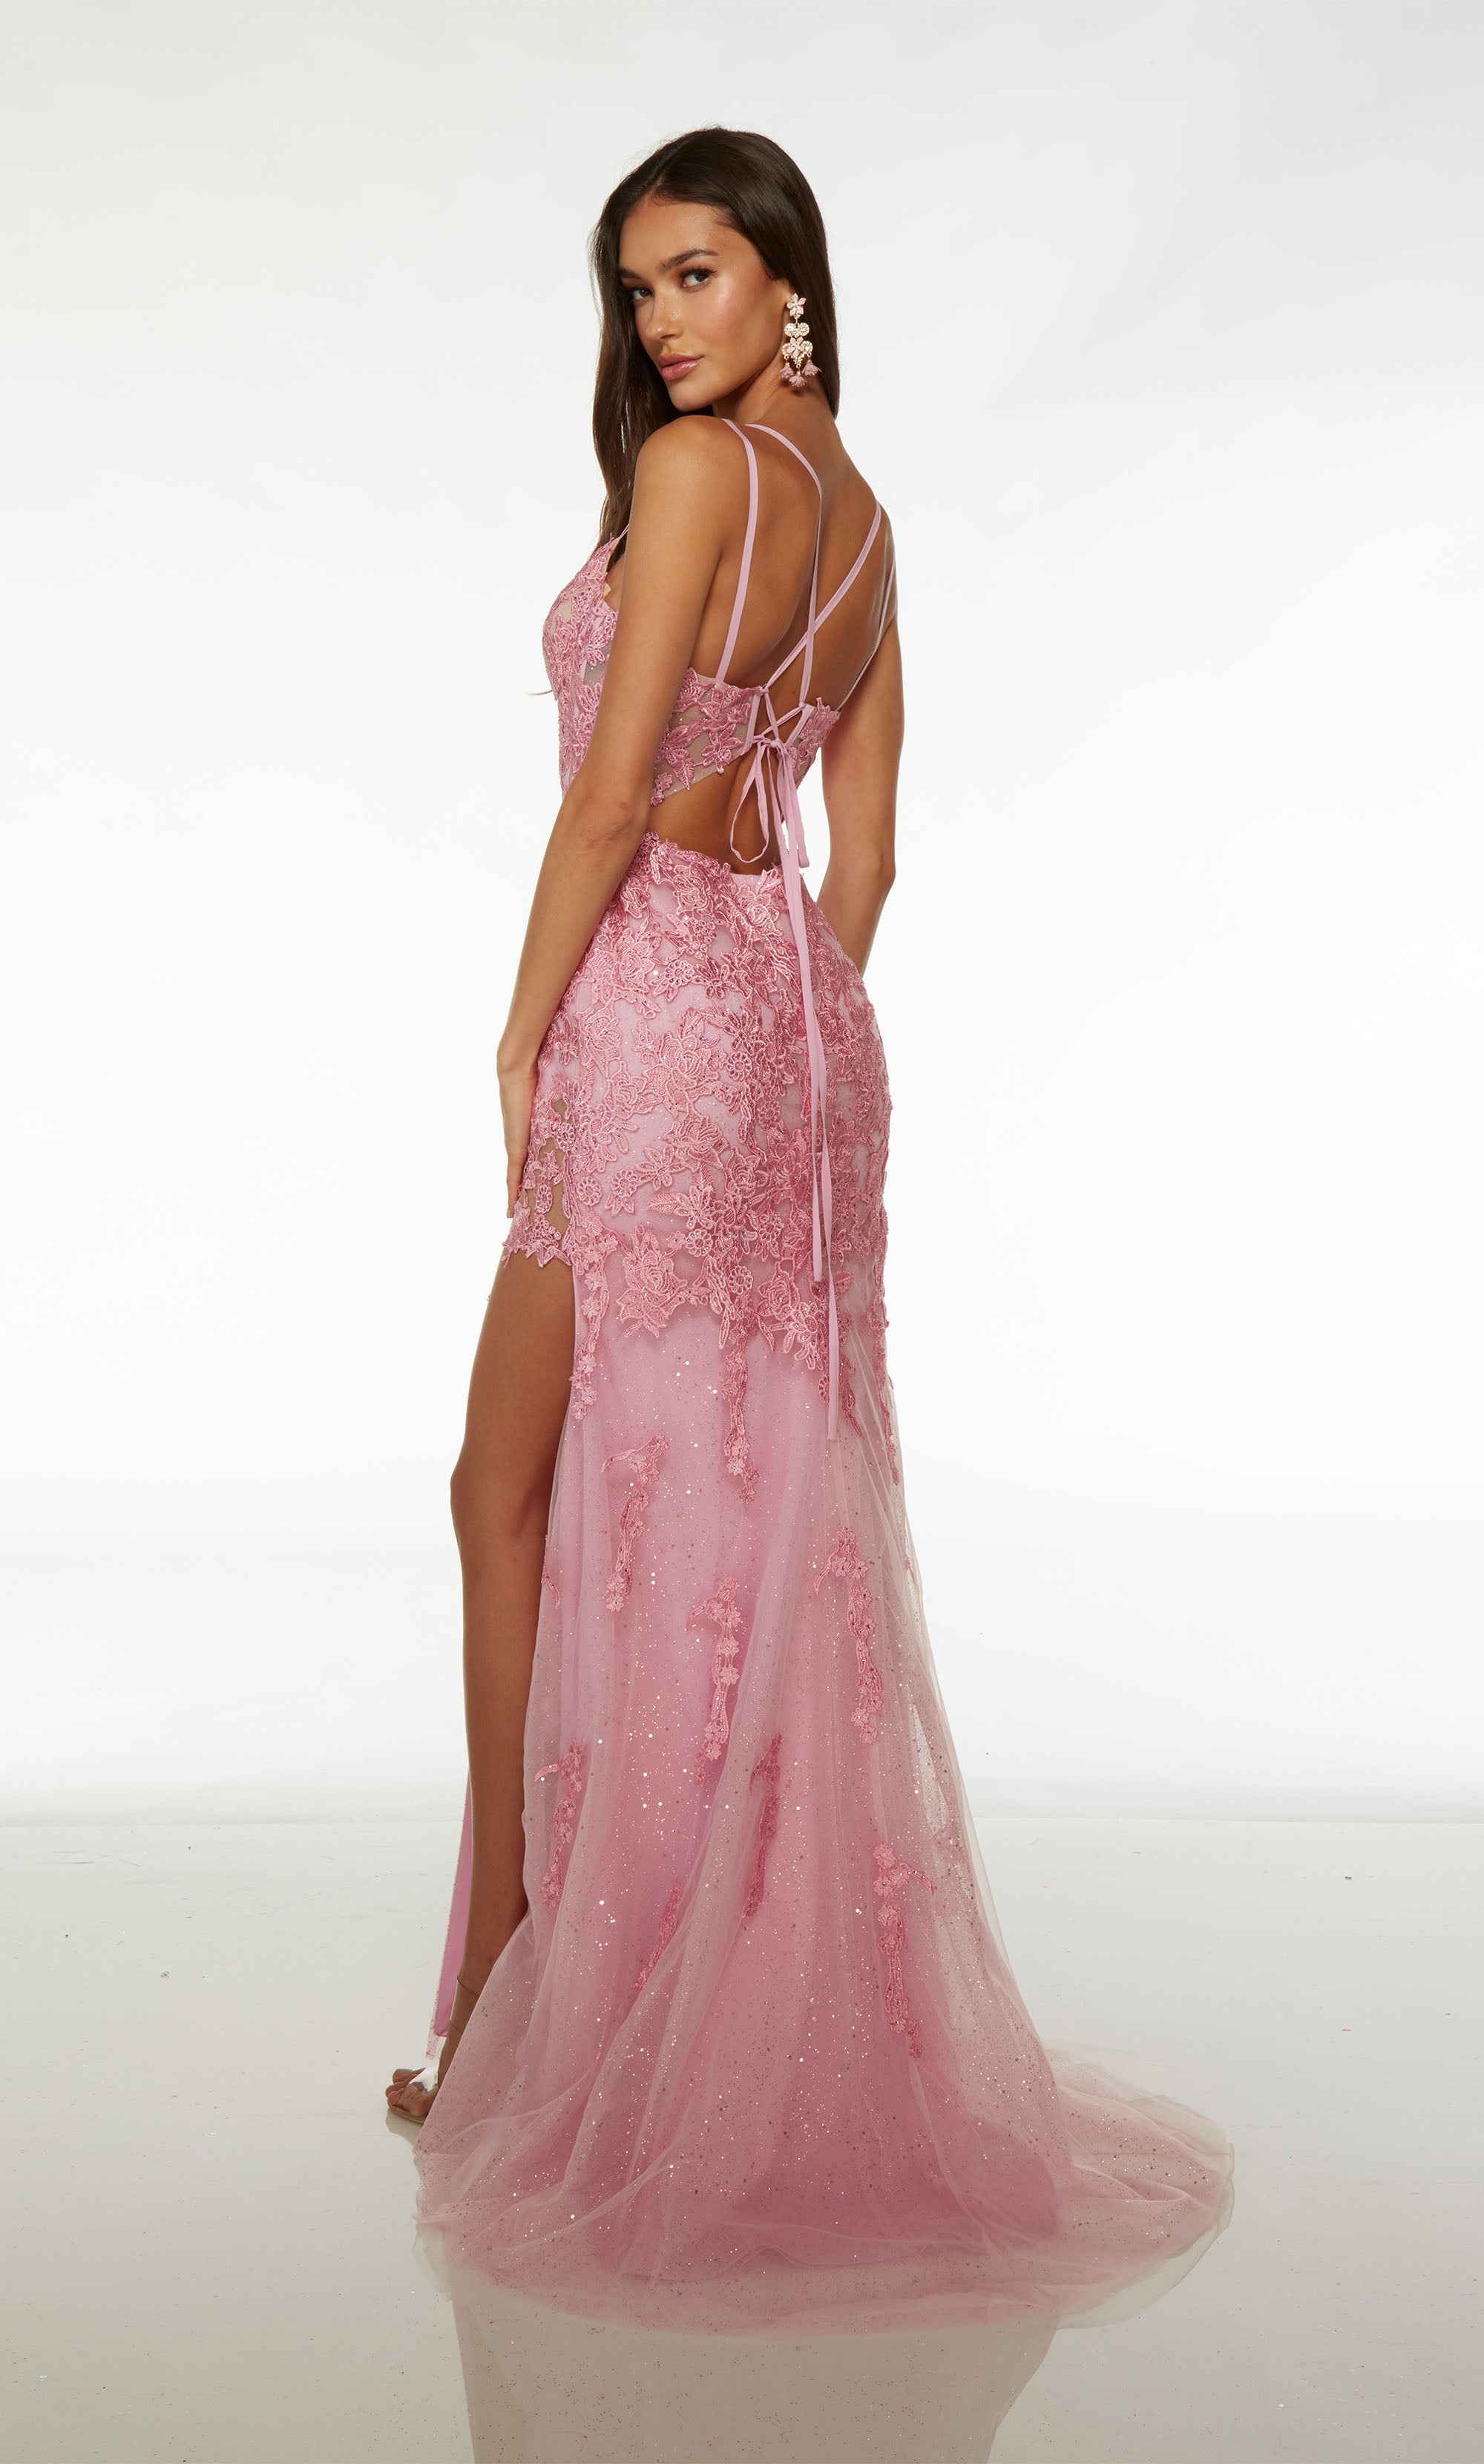 Plunge Neckline Dress with Tulle Bottom - Dusty Pink - Be Fabulous